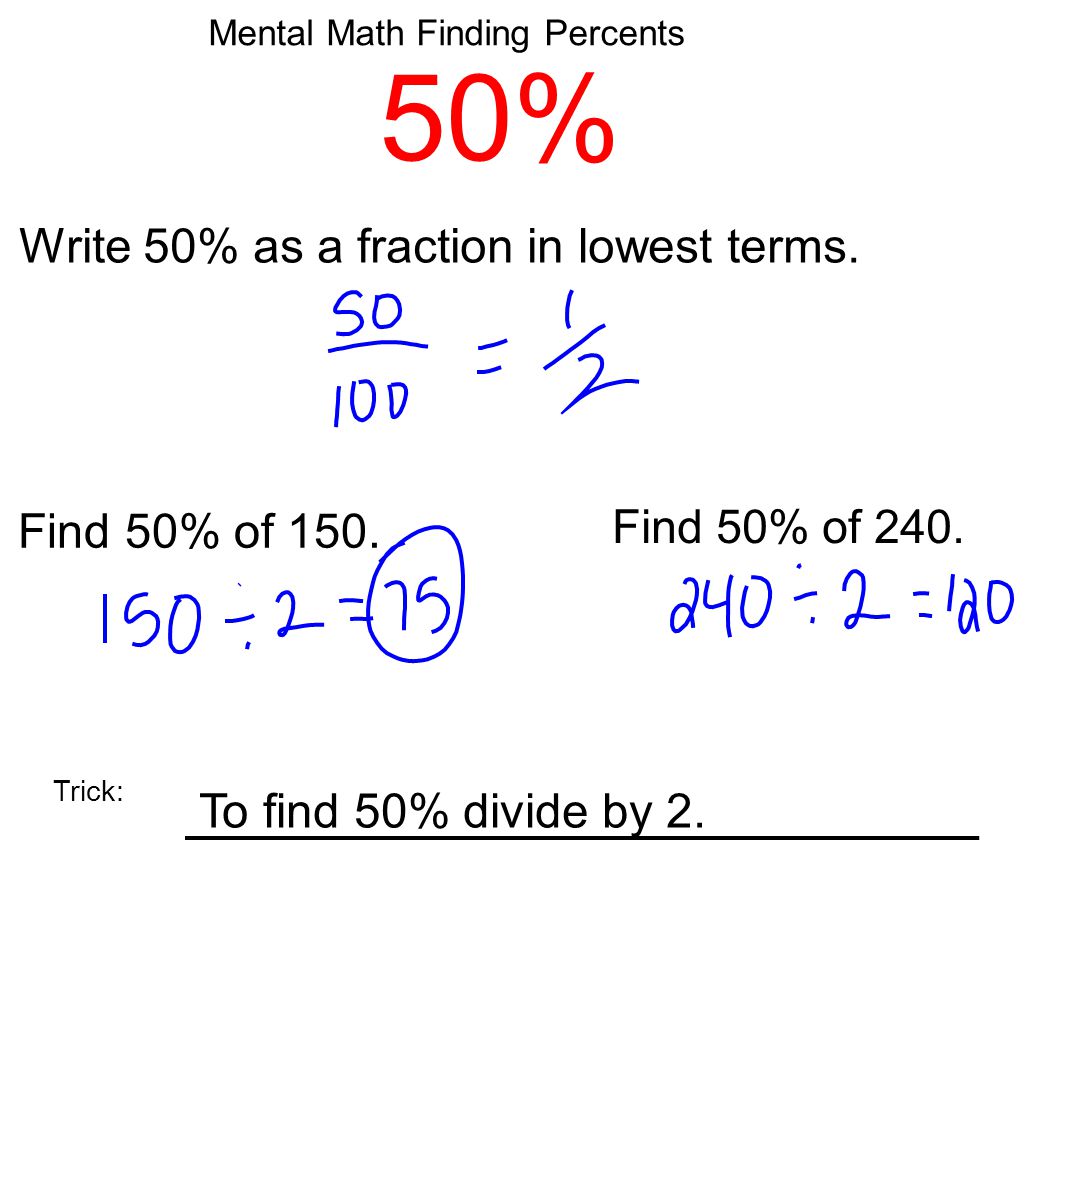 Mental Math Finding Percents 50% Write 50% as a fraction in lowest terms.